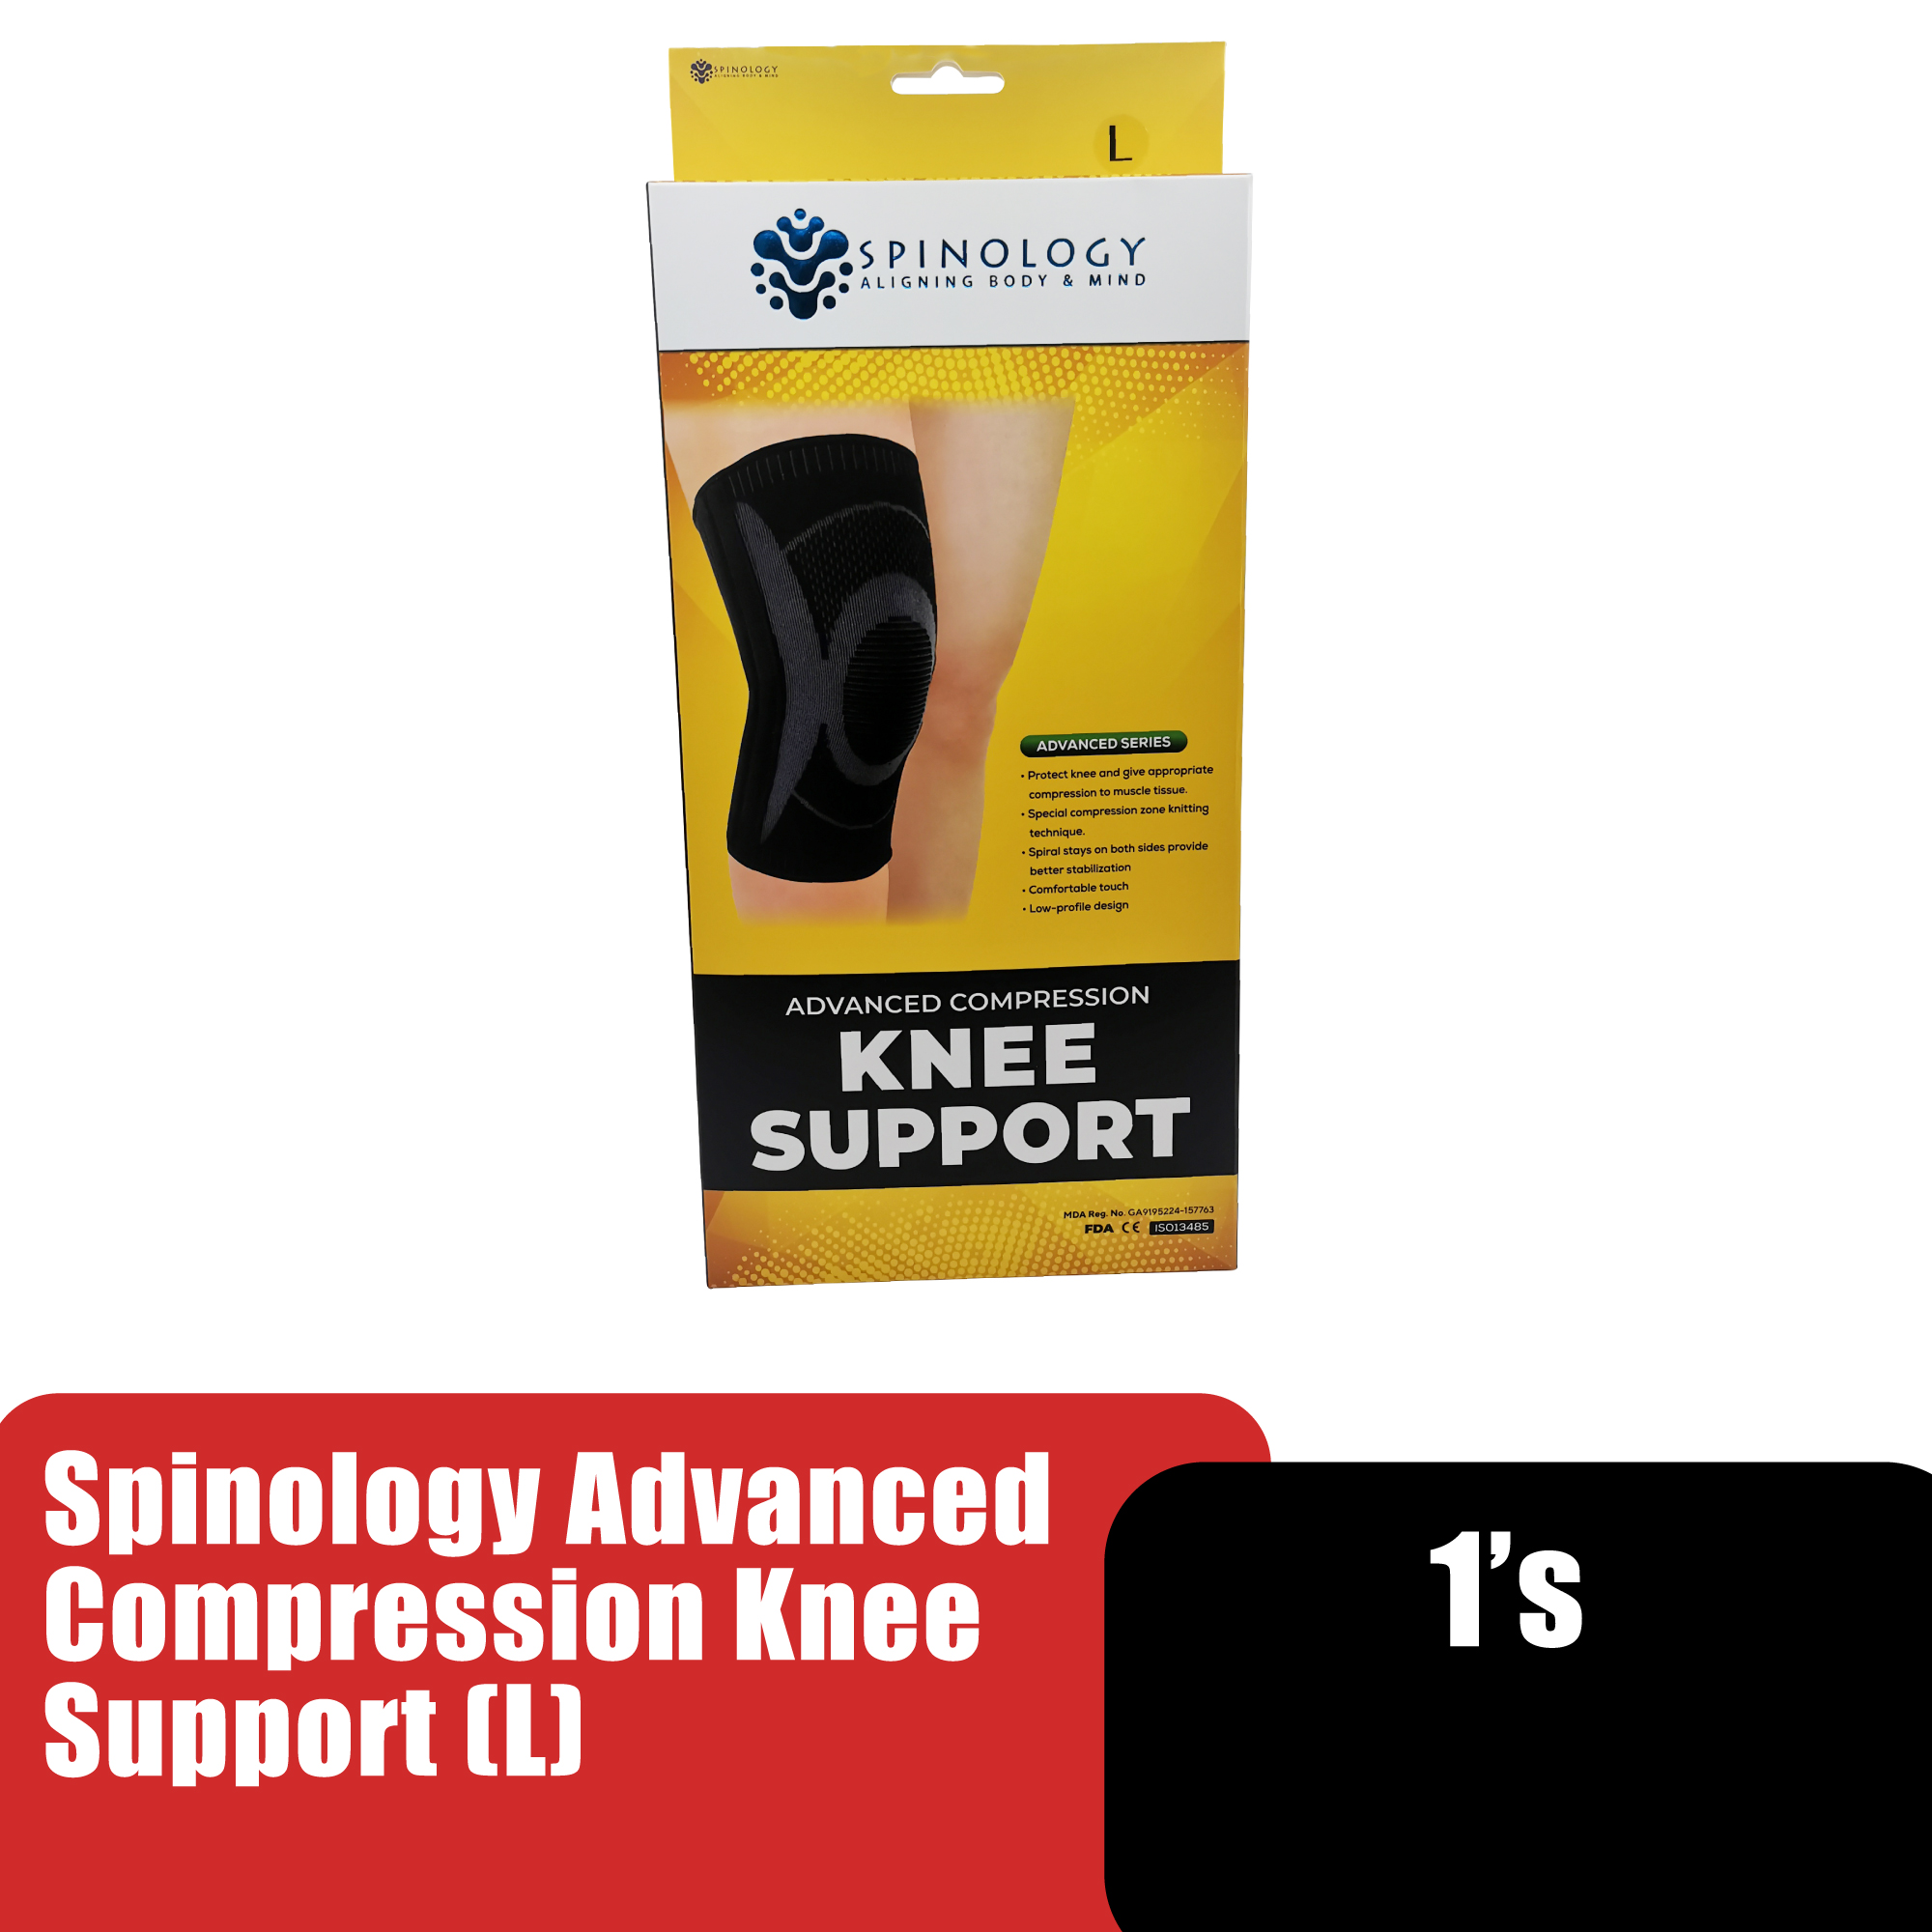 SPINOLOGY Advanced Compression Knee Guard Support Medical - L 护膝套 膝盖 保护套 Knee Support Knee Protector Lutut